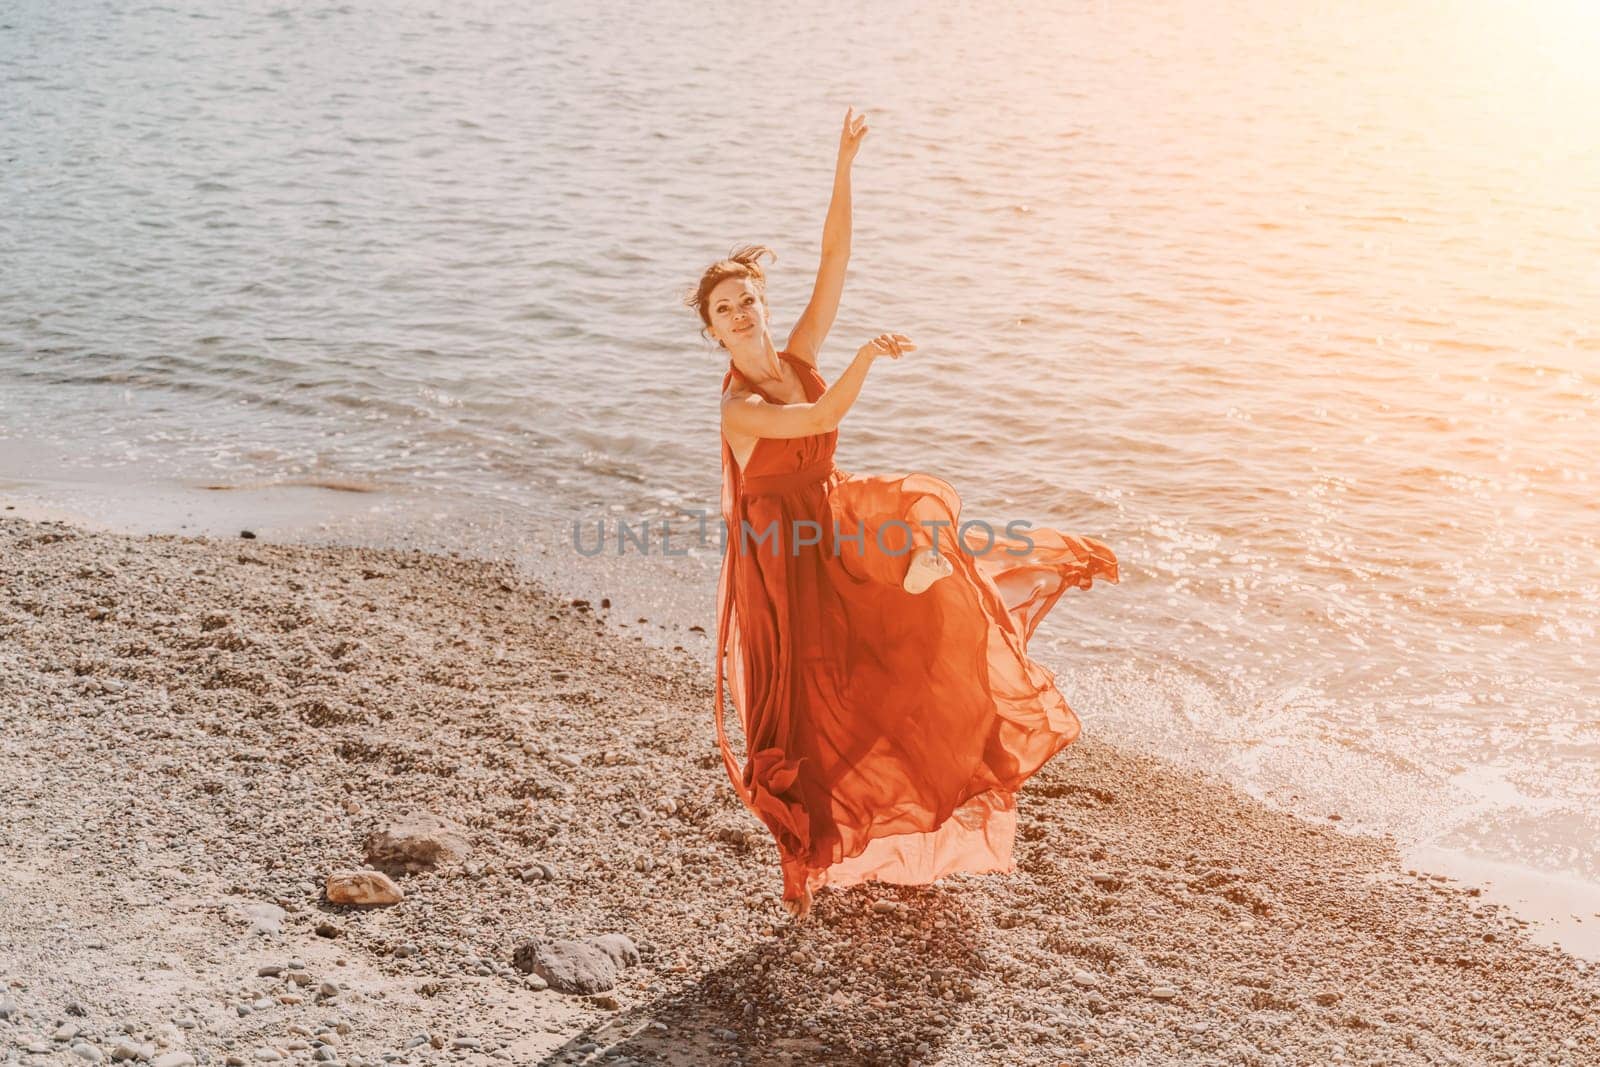 Woman red dress sea. Female dancer in a long red dress posing on a beach with rocks on sunny day. Girl on the nature on blue sky background